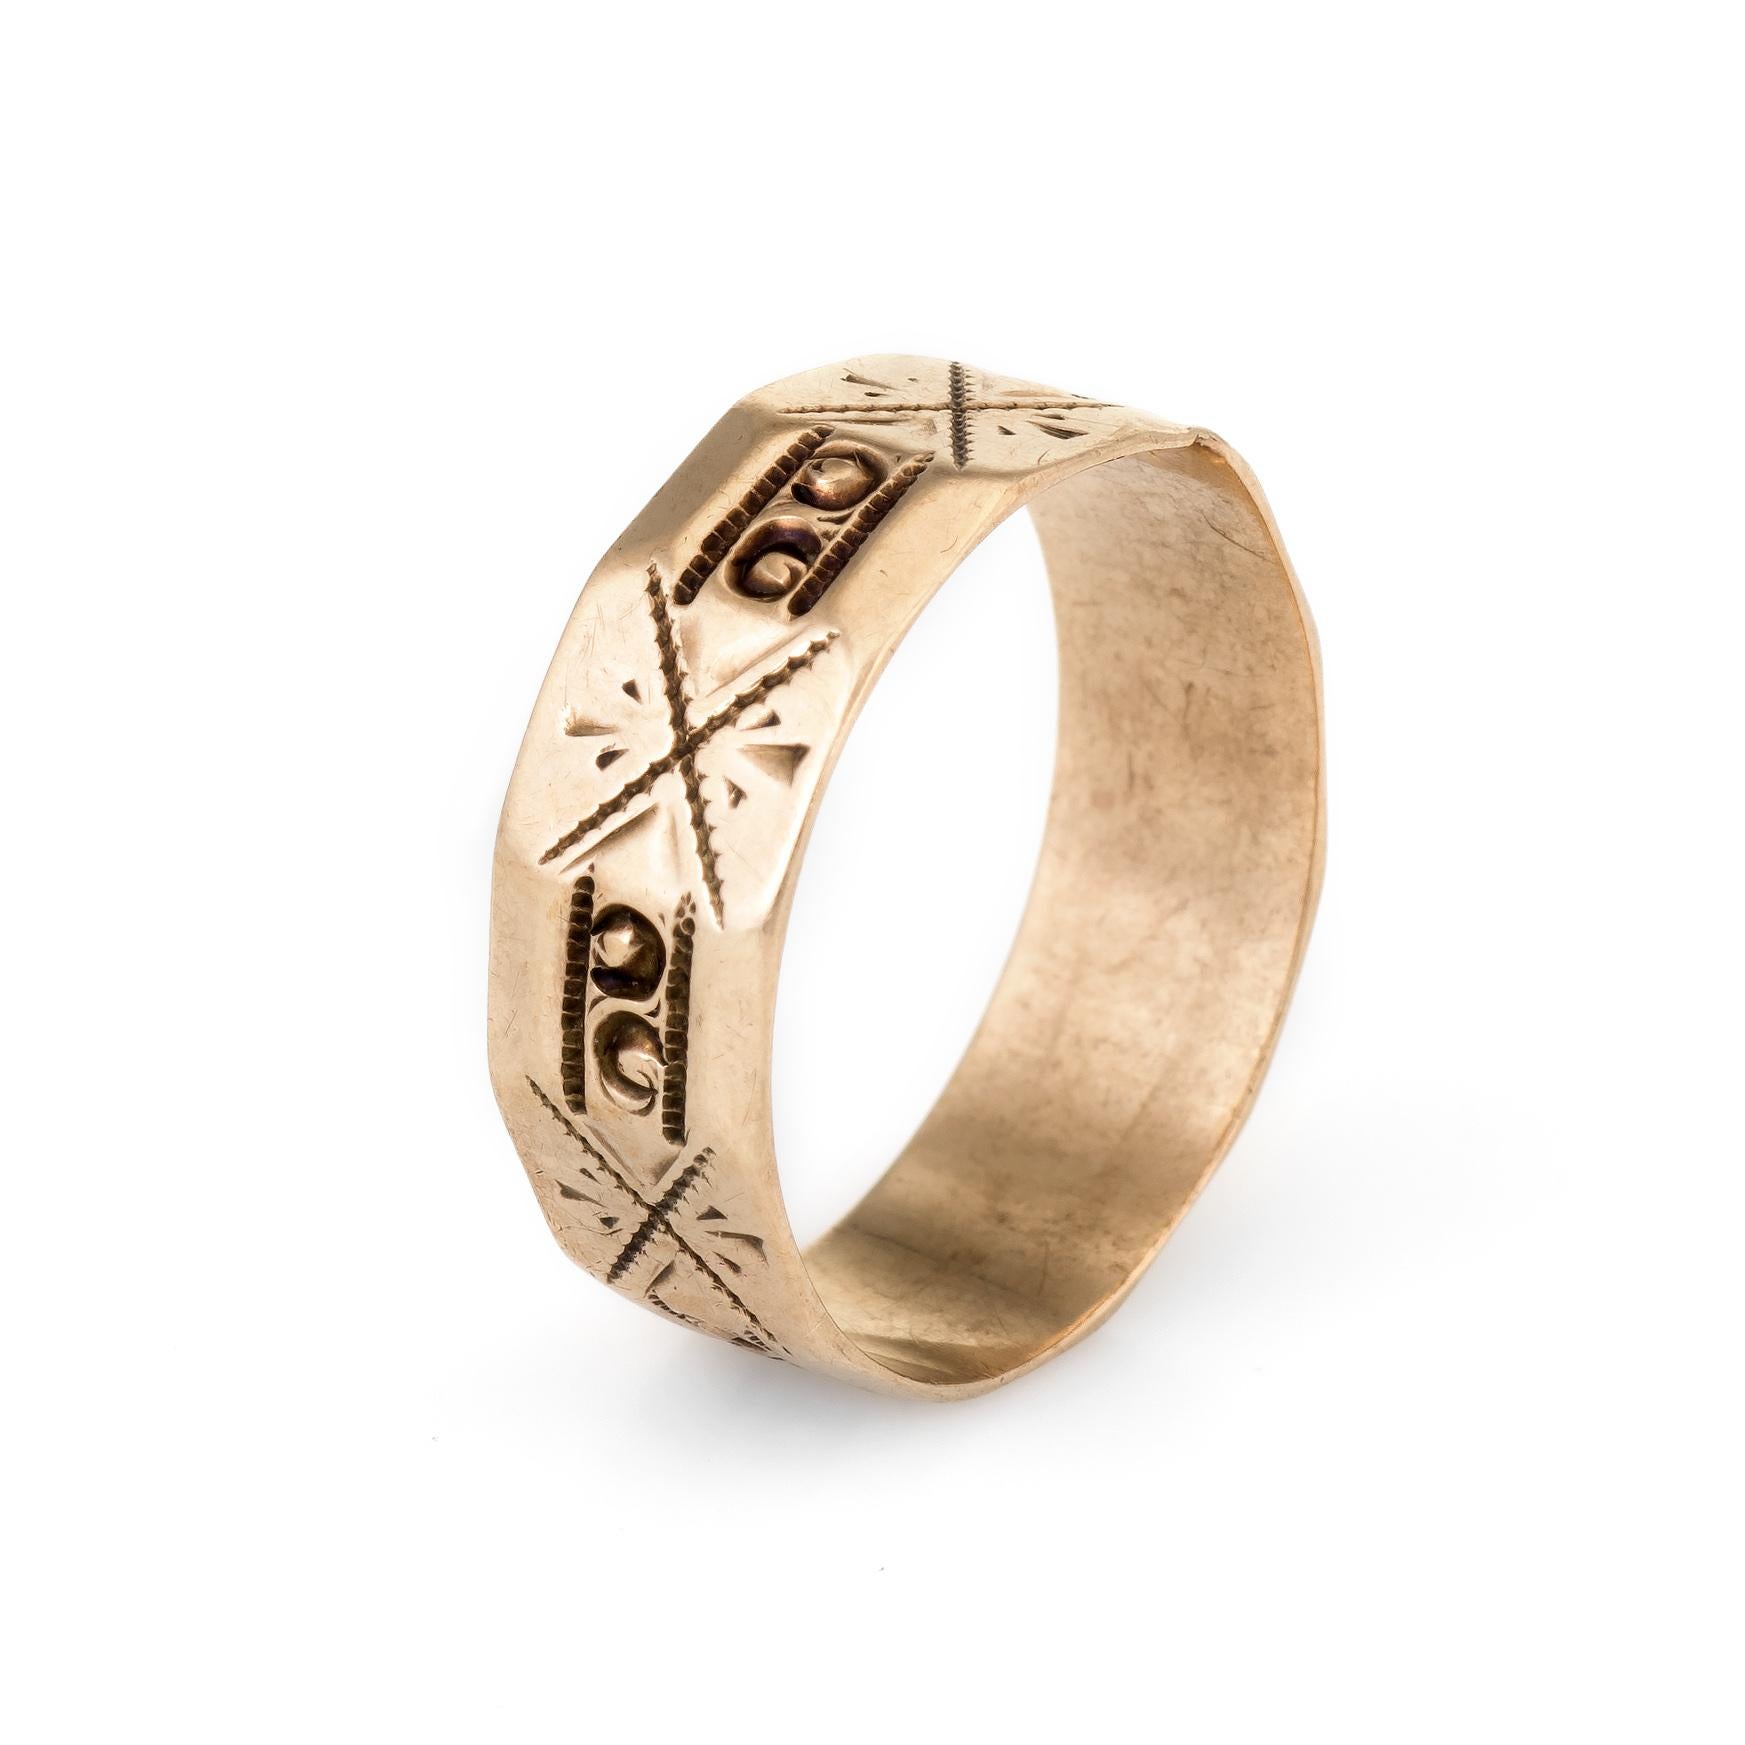 Elegant antique Victorian ring (circa 1880s to 1900s), crafted in 14 karat rose gold. 

The wedding band features panels set all the way around the band with a charming embossed pattern.

The ring is in very good condition. Note: some wear visible